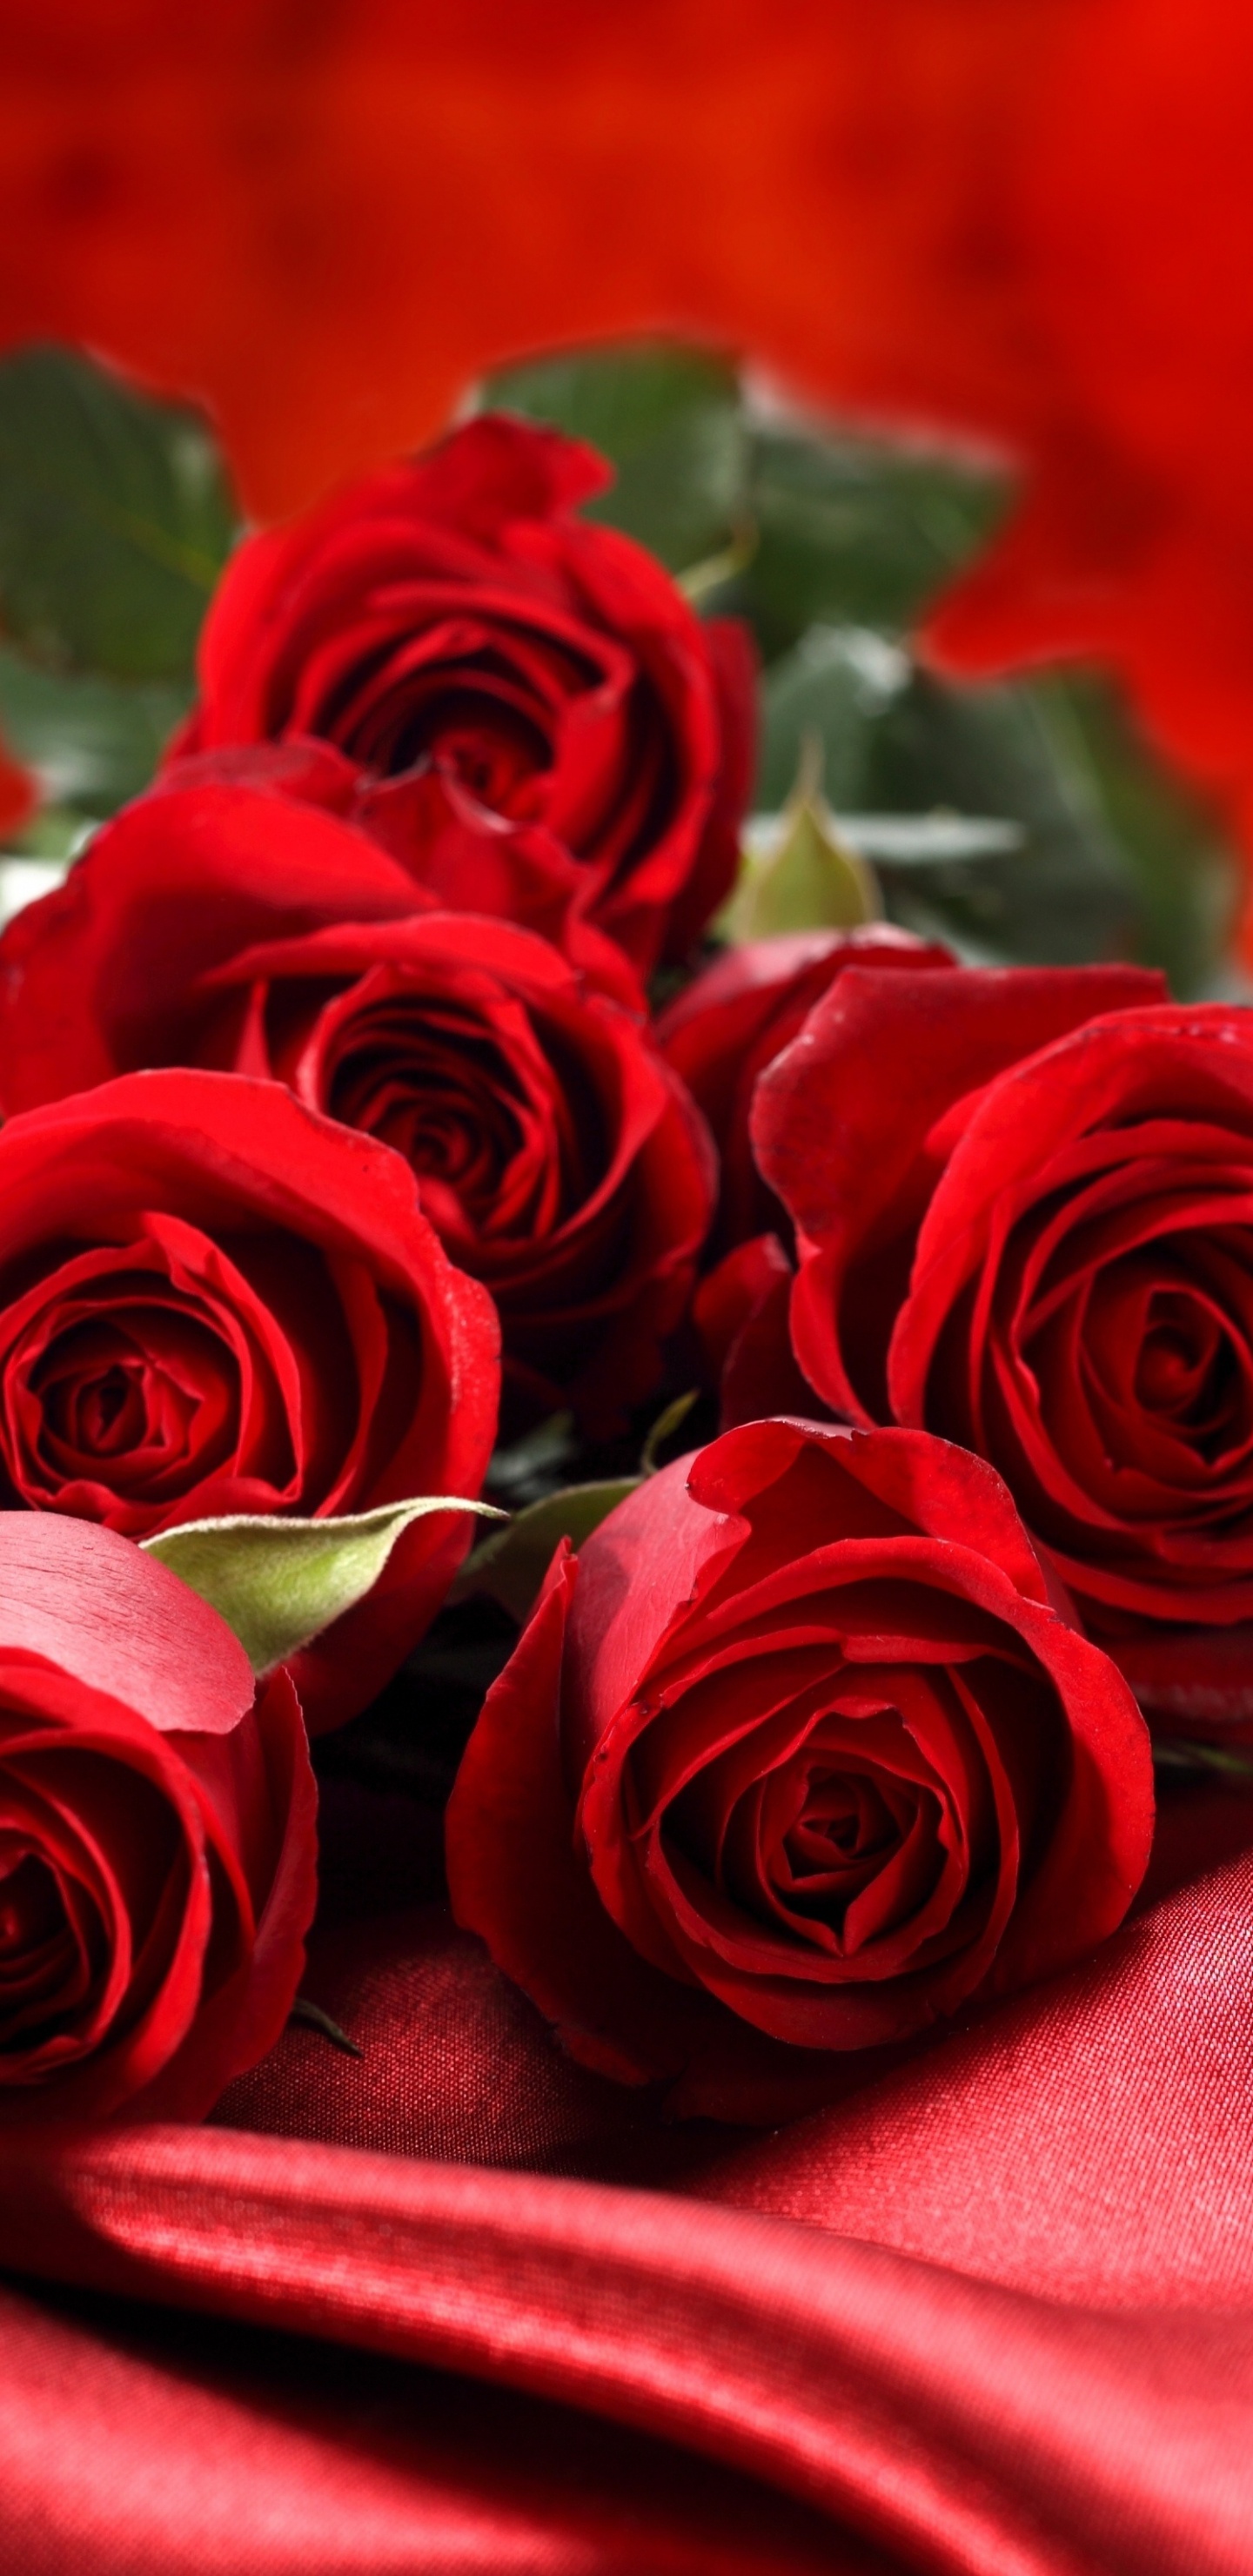 Red Roses on Red Textile. Wallpaper in 1440x2960 Resolution